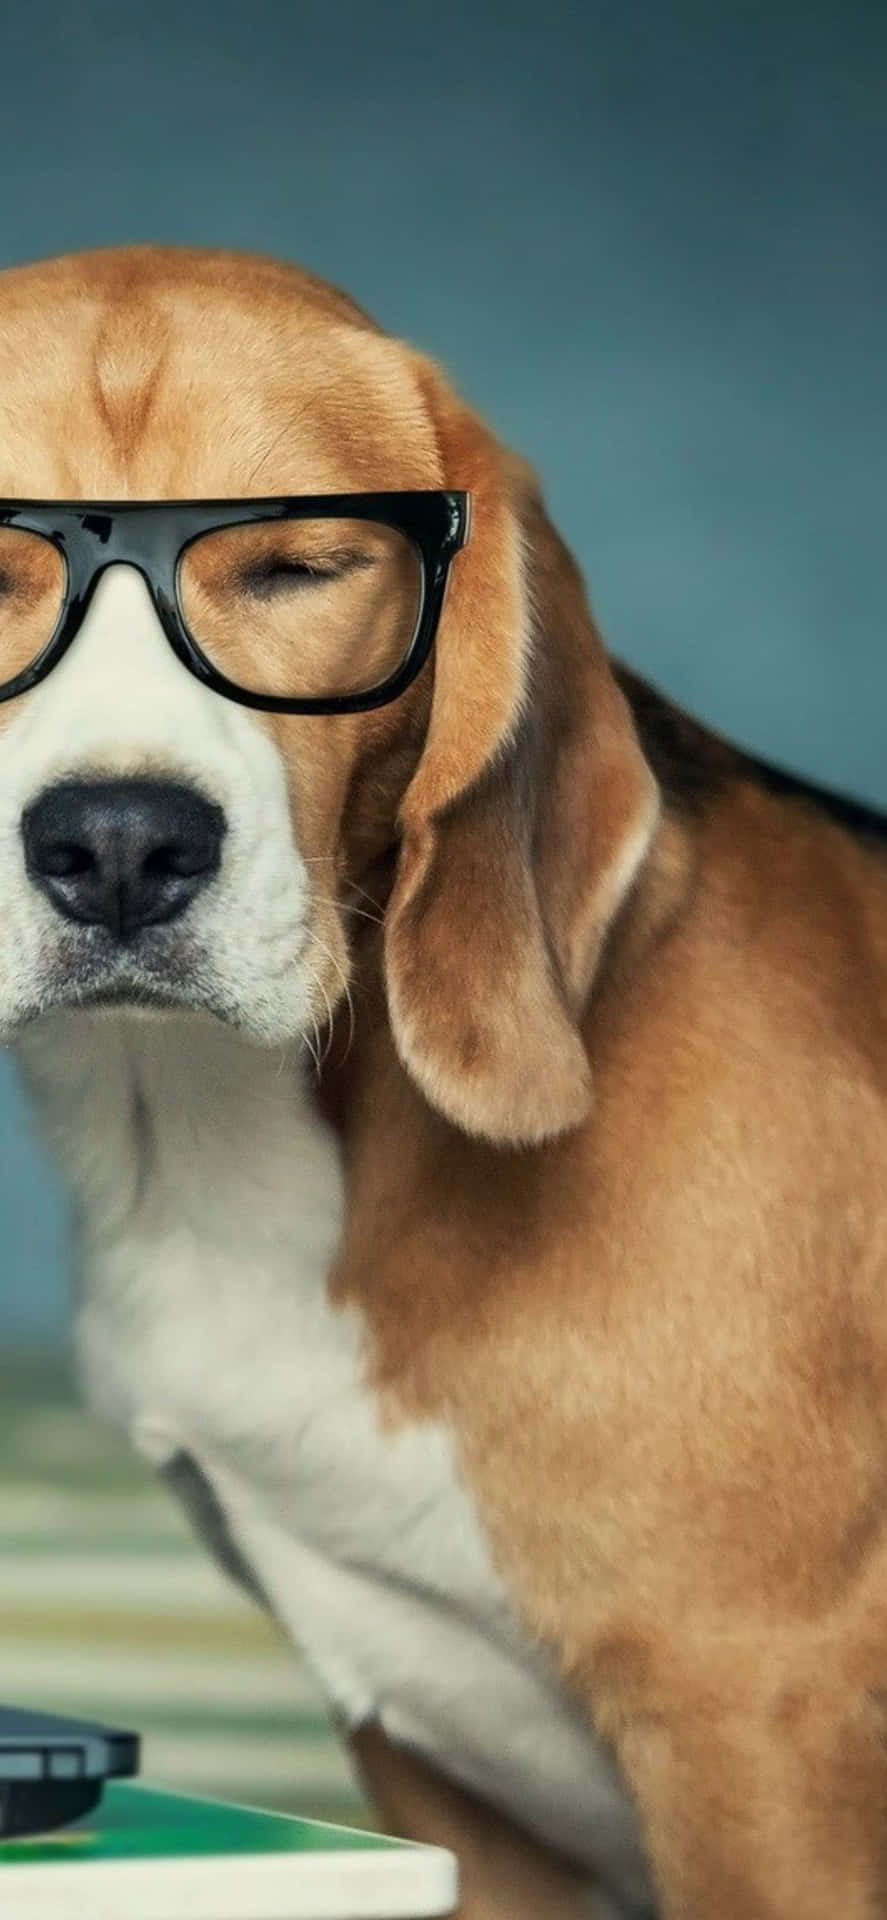 A Dog Wearing Glasses And Sitting Next To A Laptop